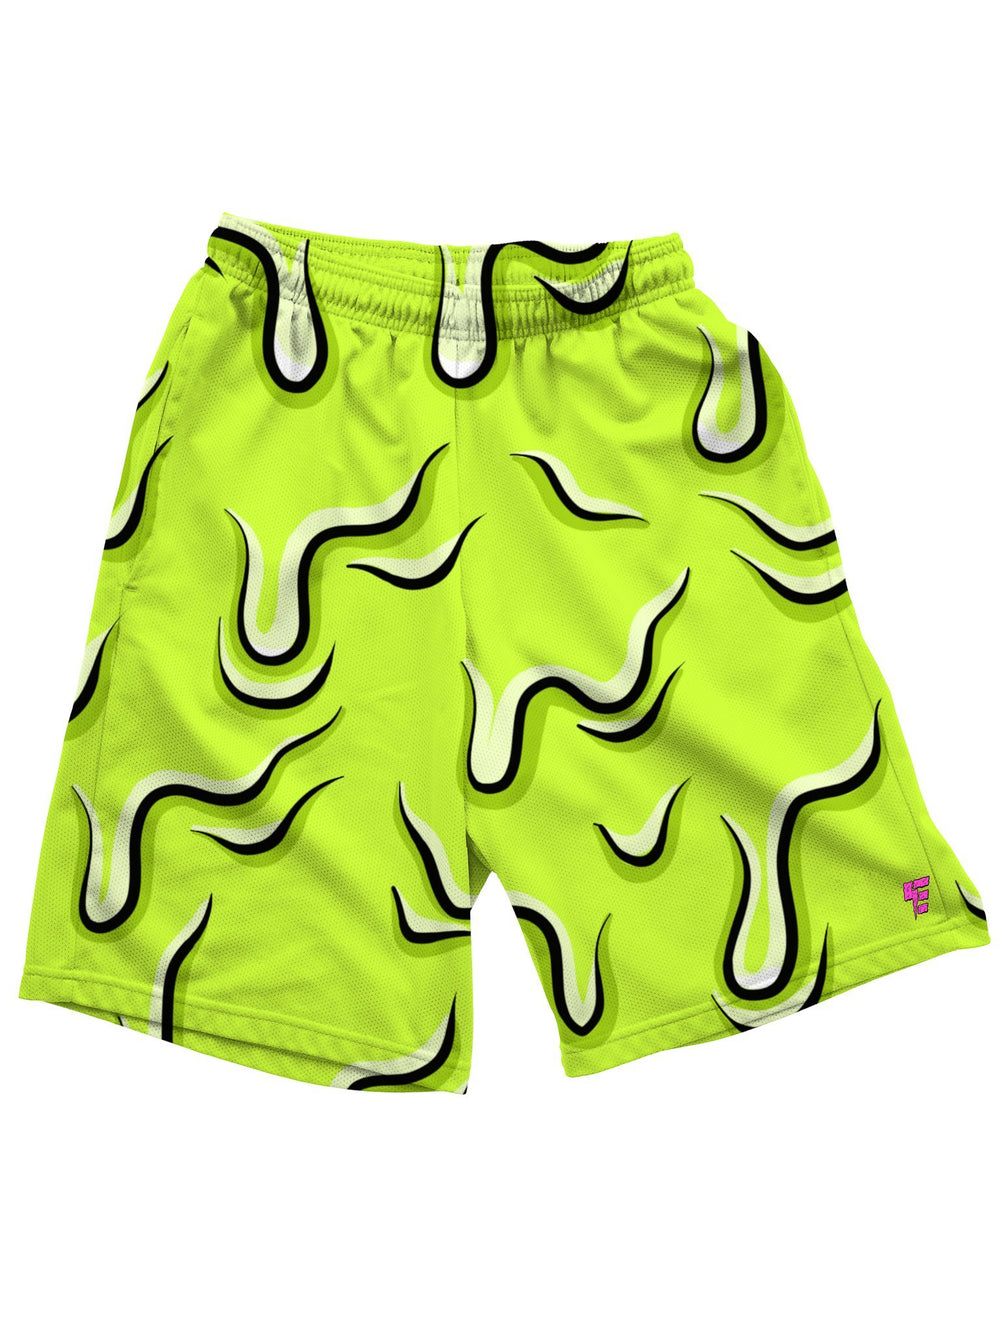 Mens Shorts: Perfect For Rave Festivals, Swimwear or the Gym Page 2 ...